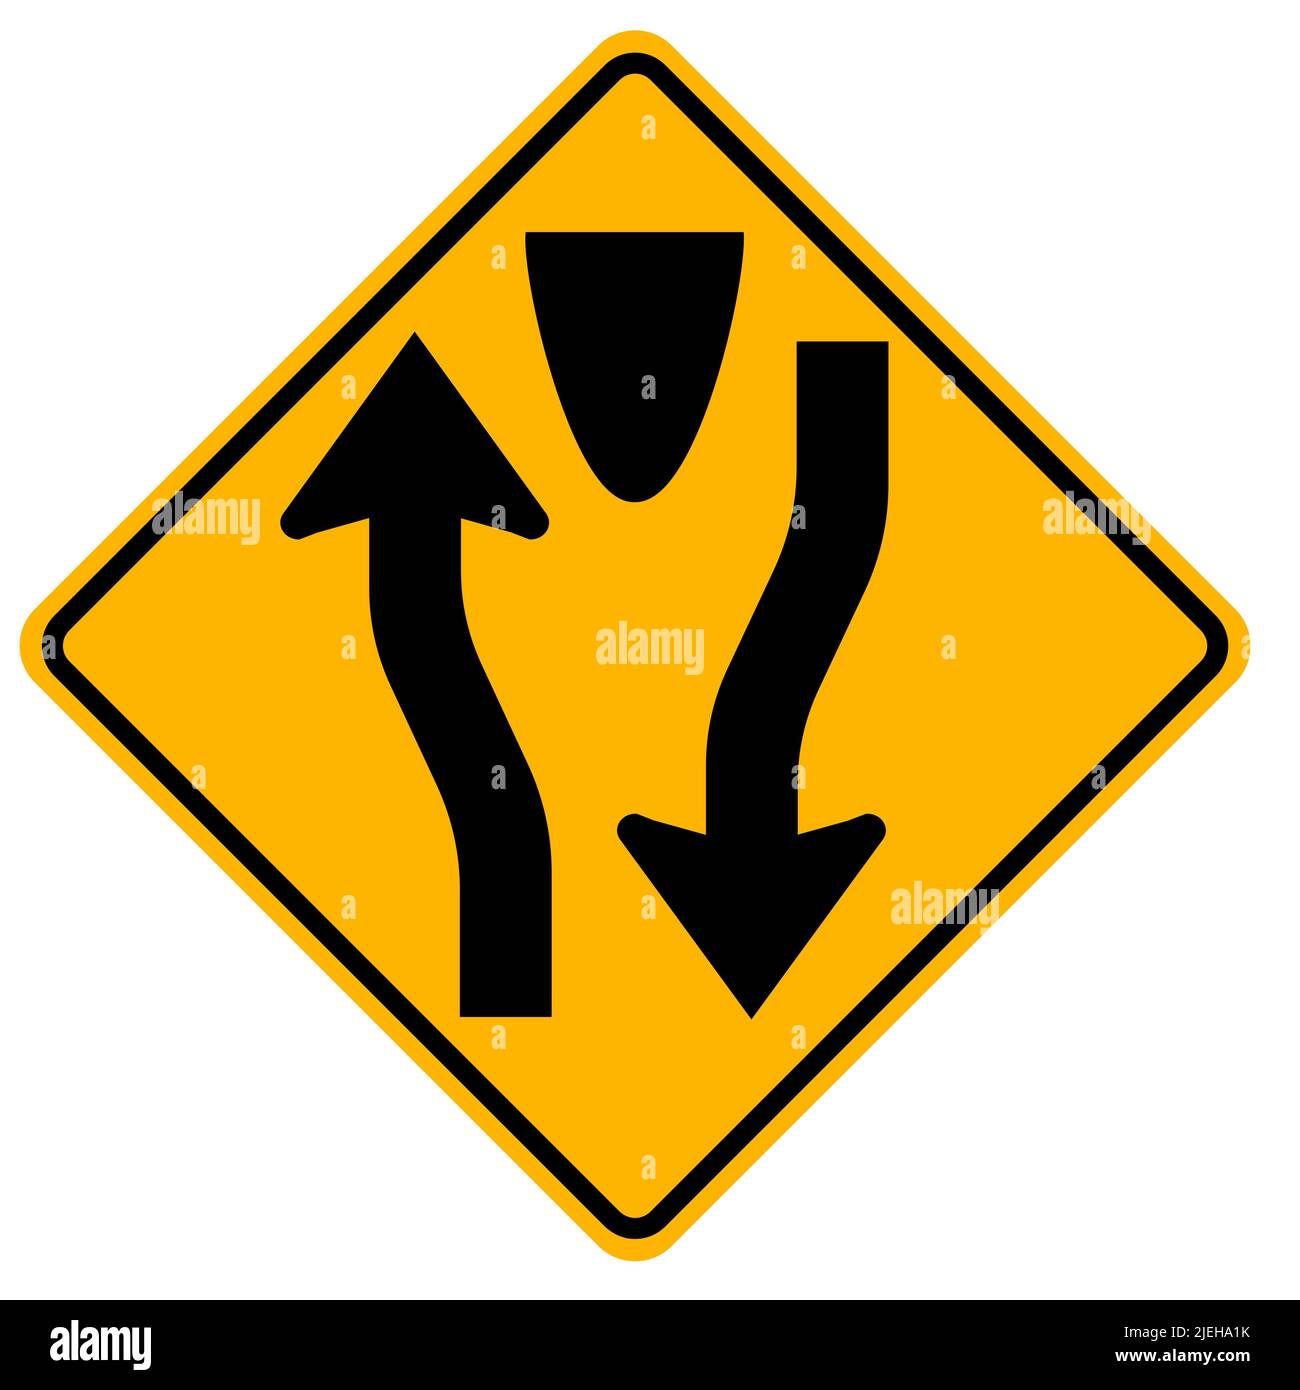 Warning signs Divided road begins on white background Stock Vector